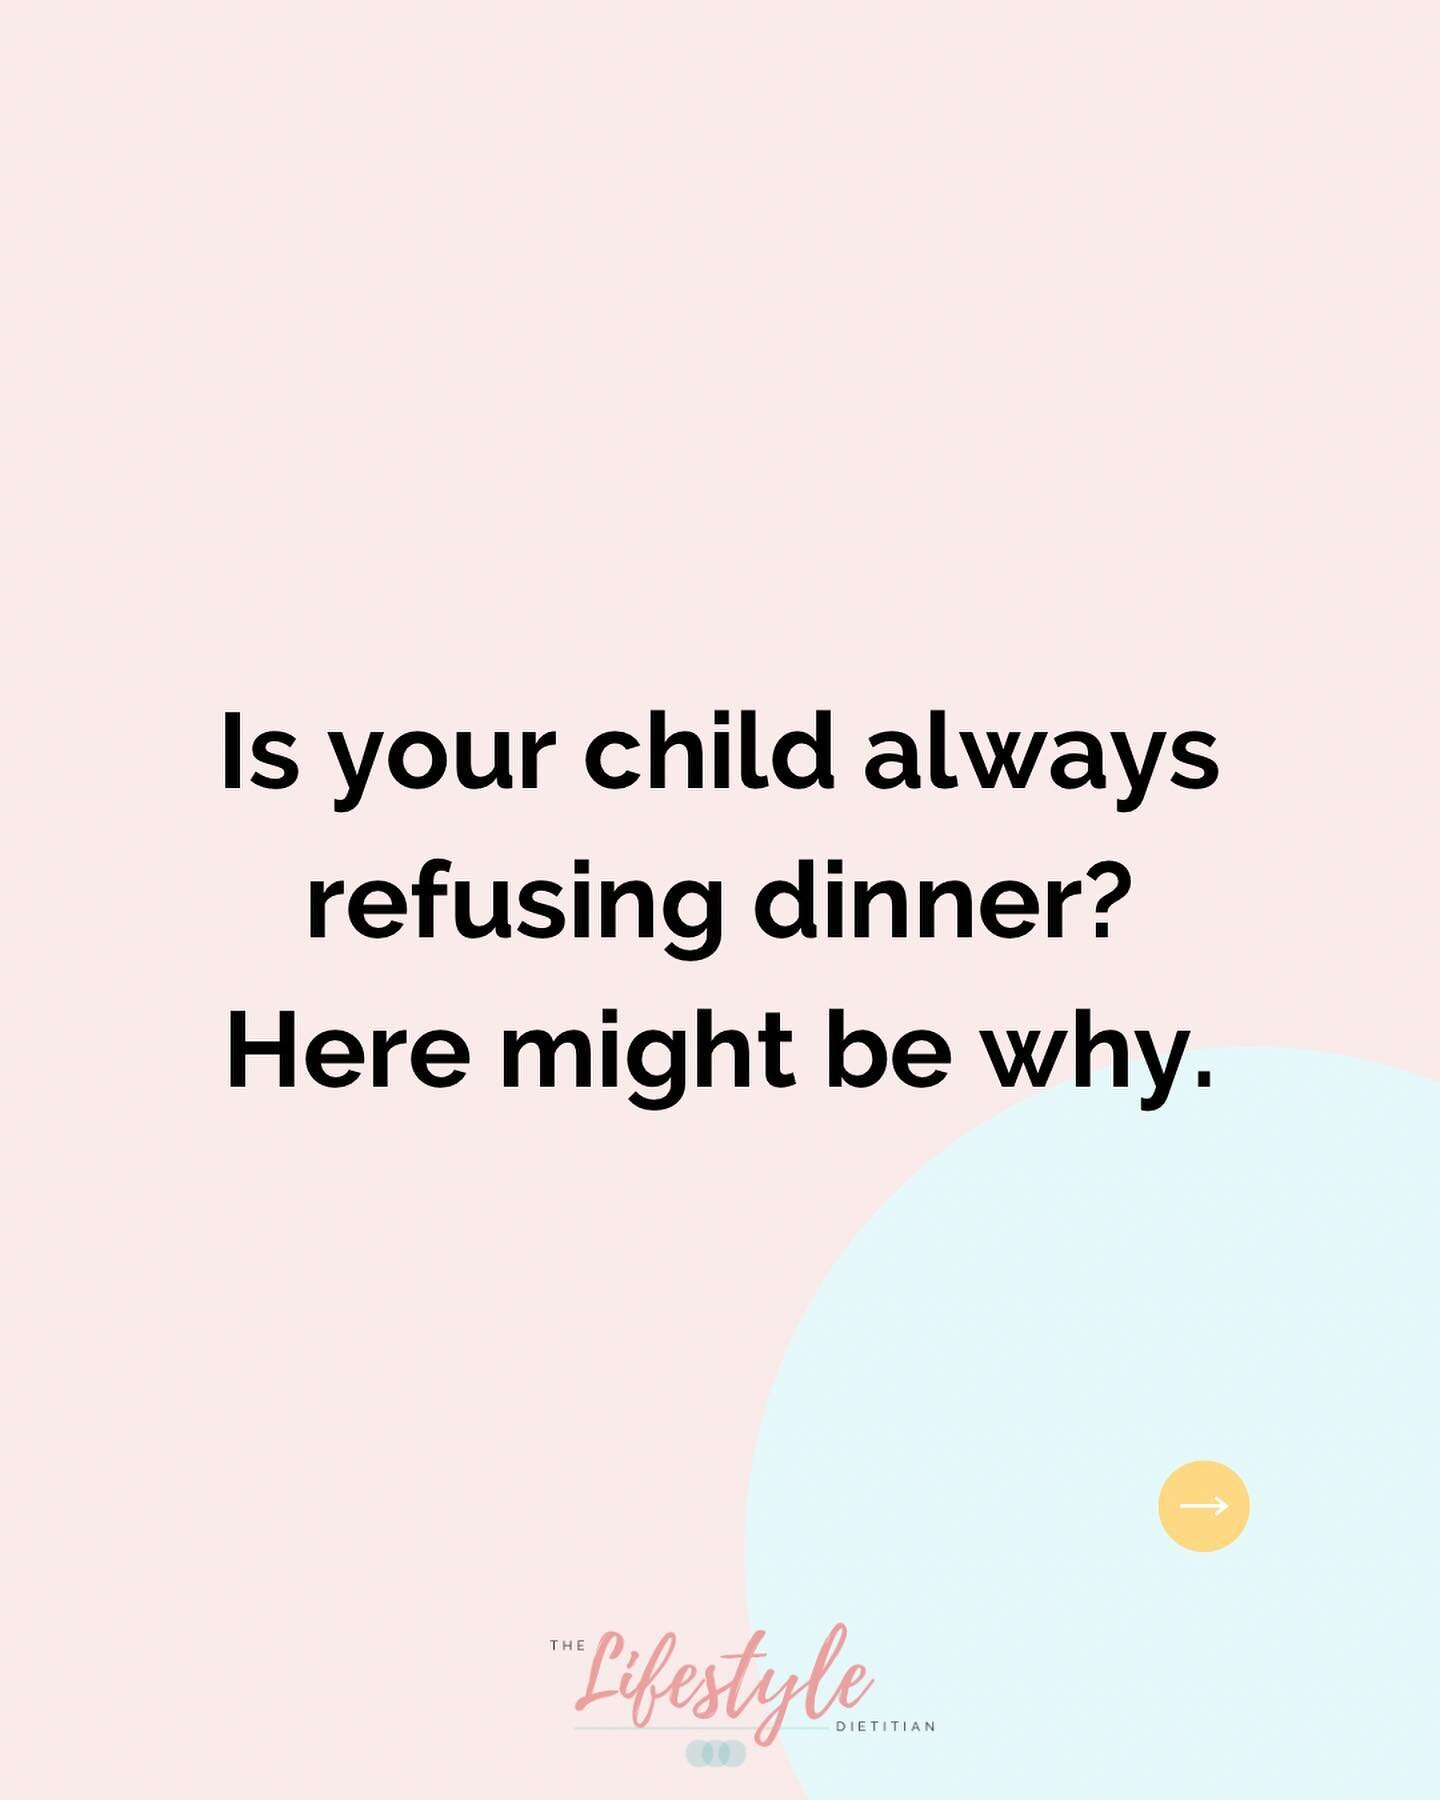 🍽️ Dinner dilemmas driving you crazy? We feel you, frustration and worry included. 

But, unlocking the mystery behind why your child is refusing to eat dinner can really help shift things ✨

Check out our top 5 reasons why those little taste buds m